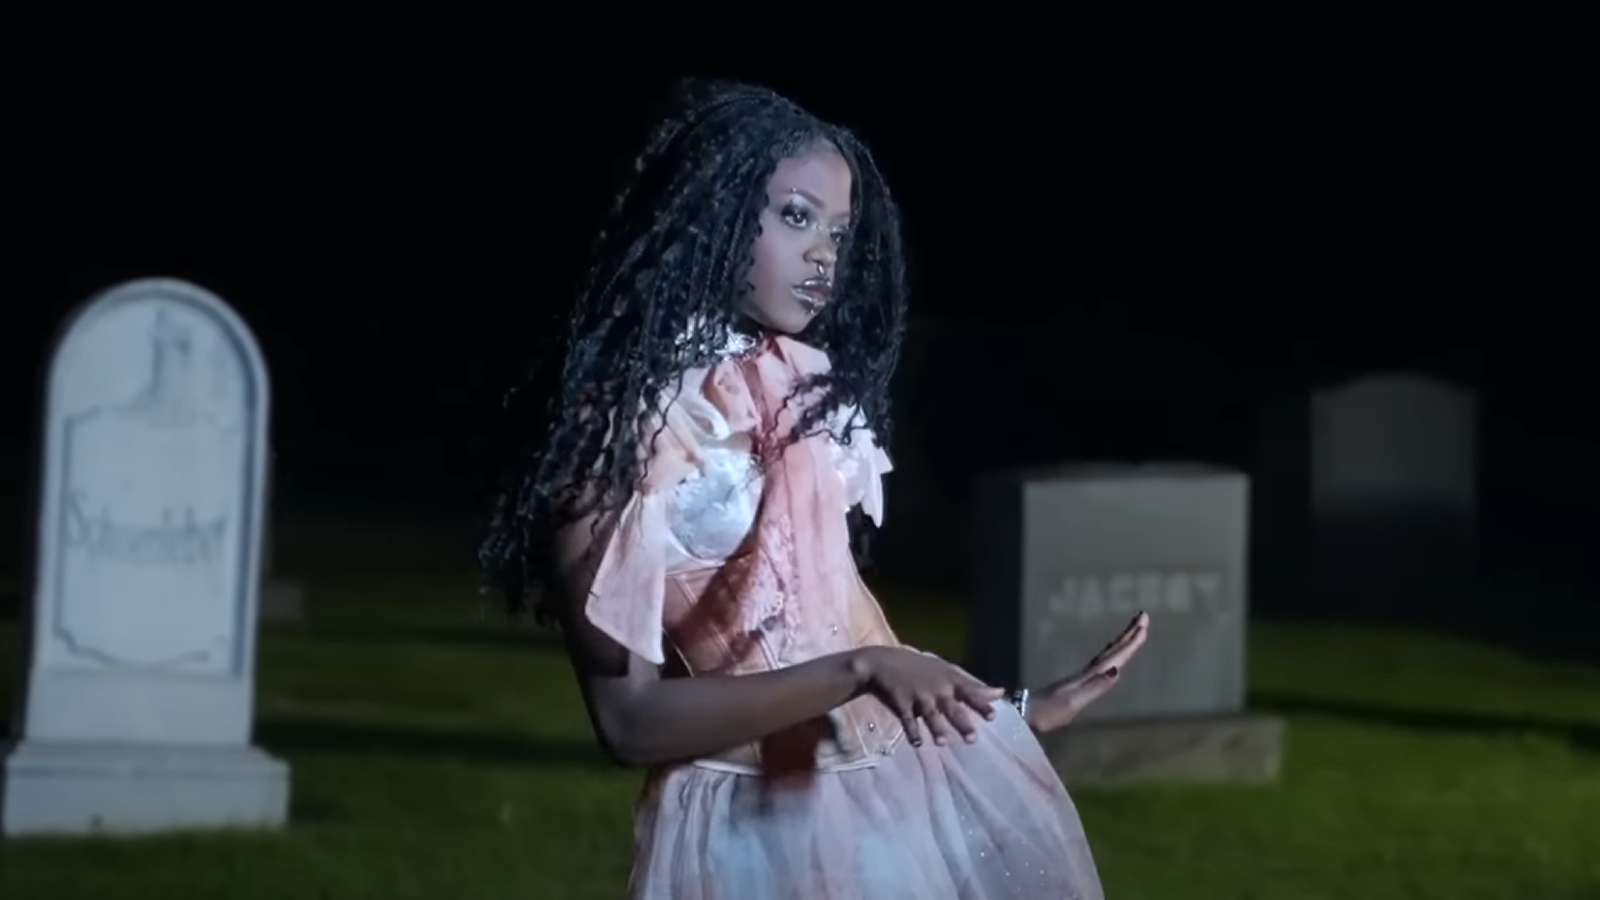 Upcoming artist Baby Storme responds to backlash over filming music video in a graveyard